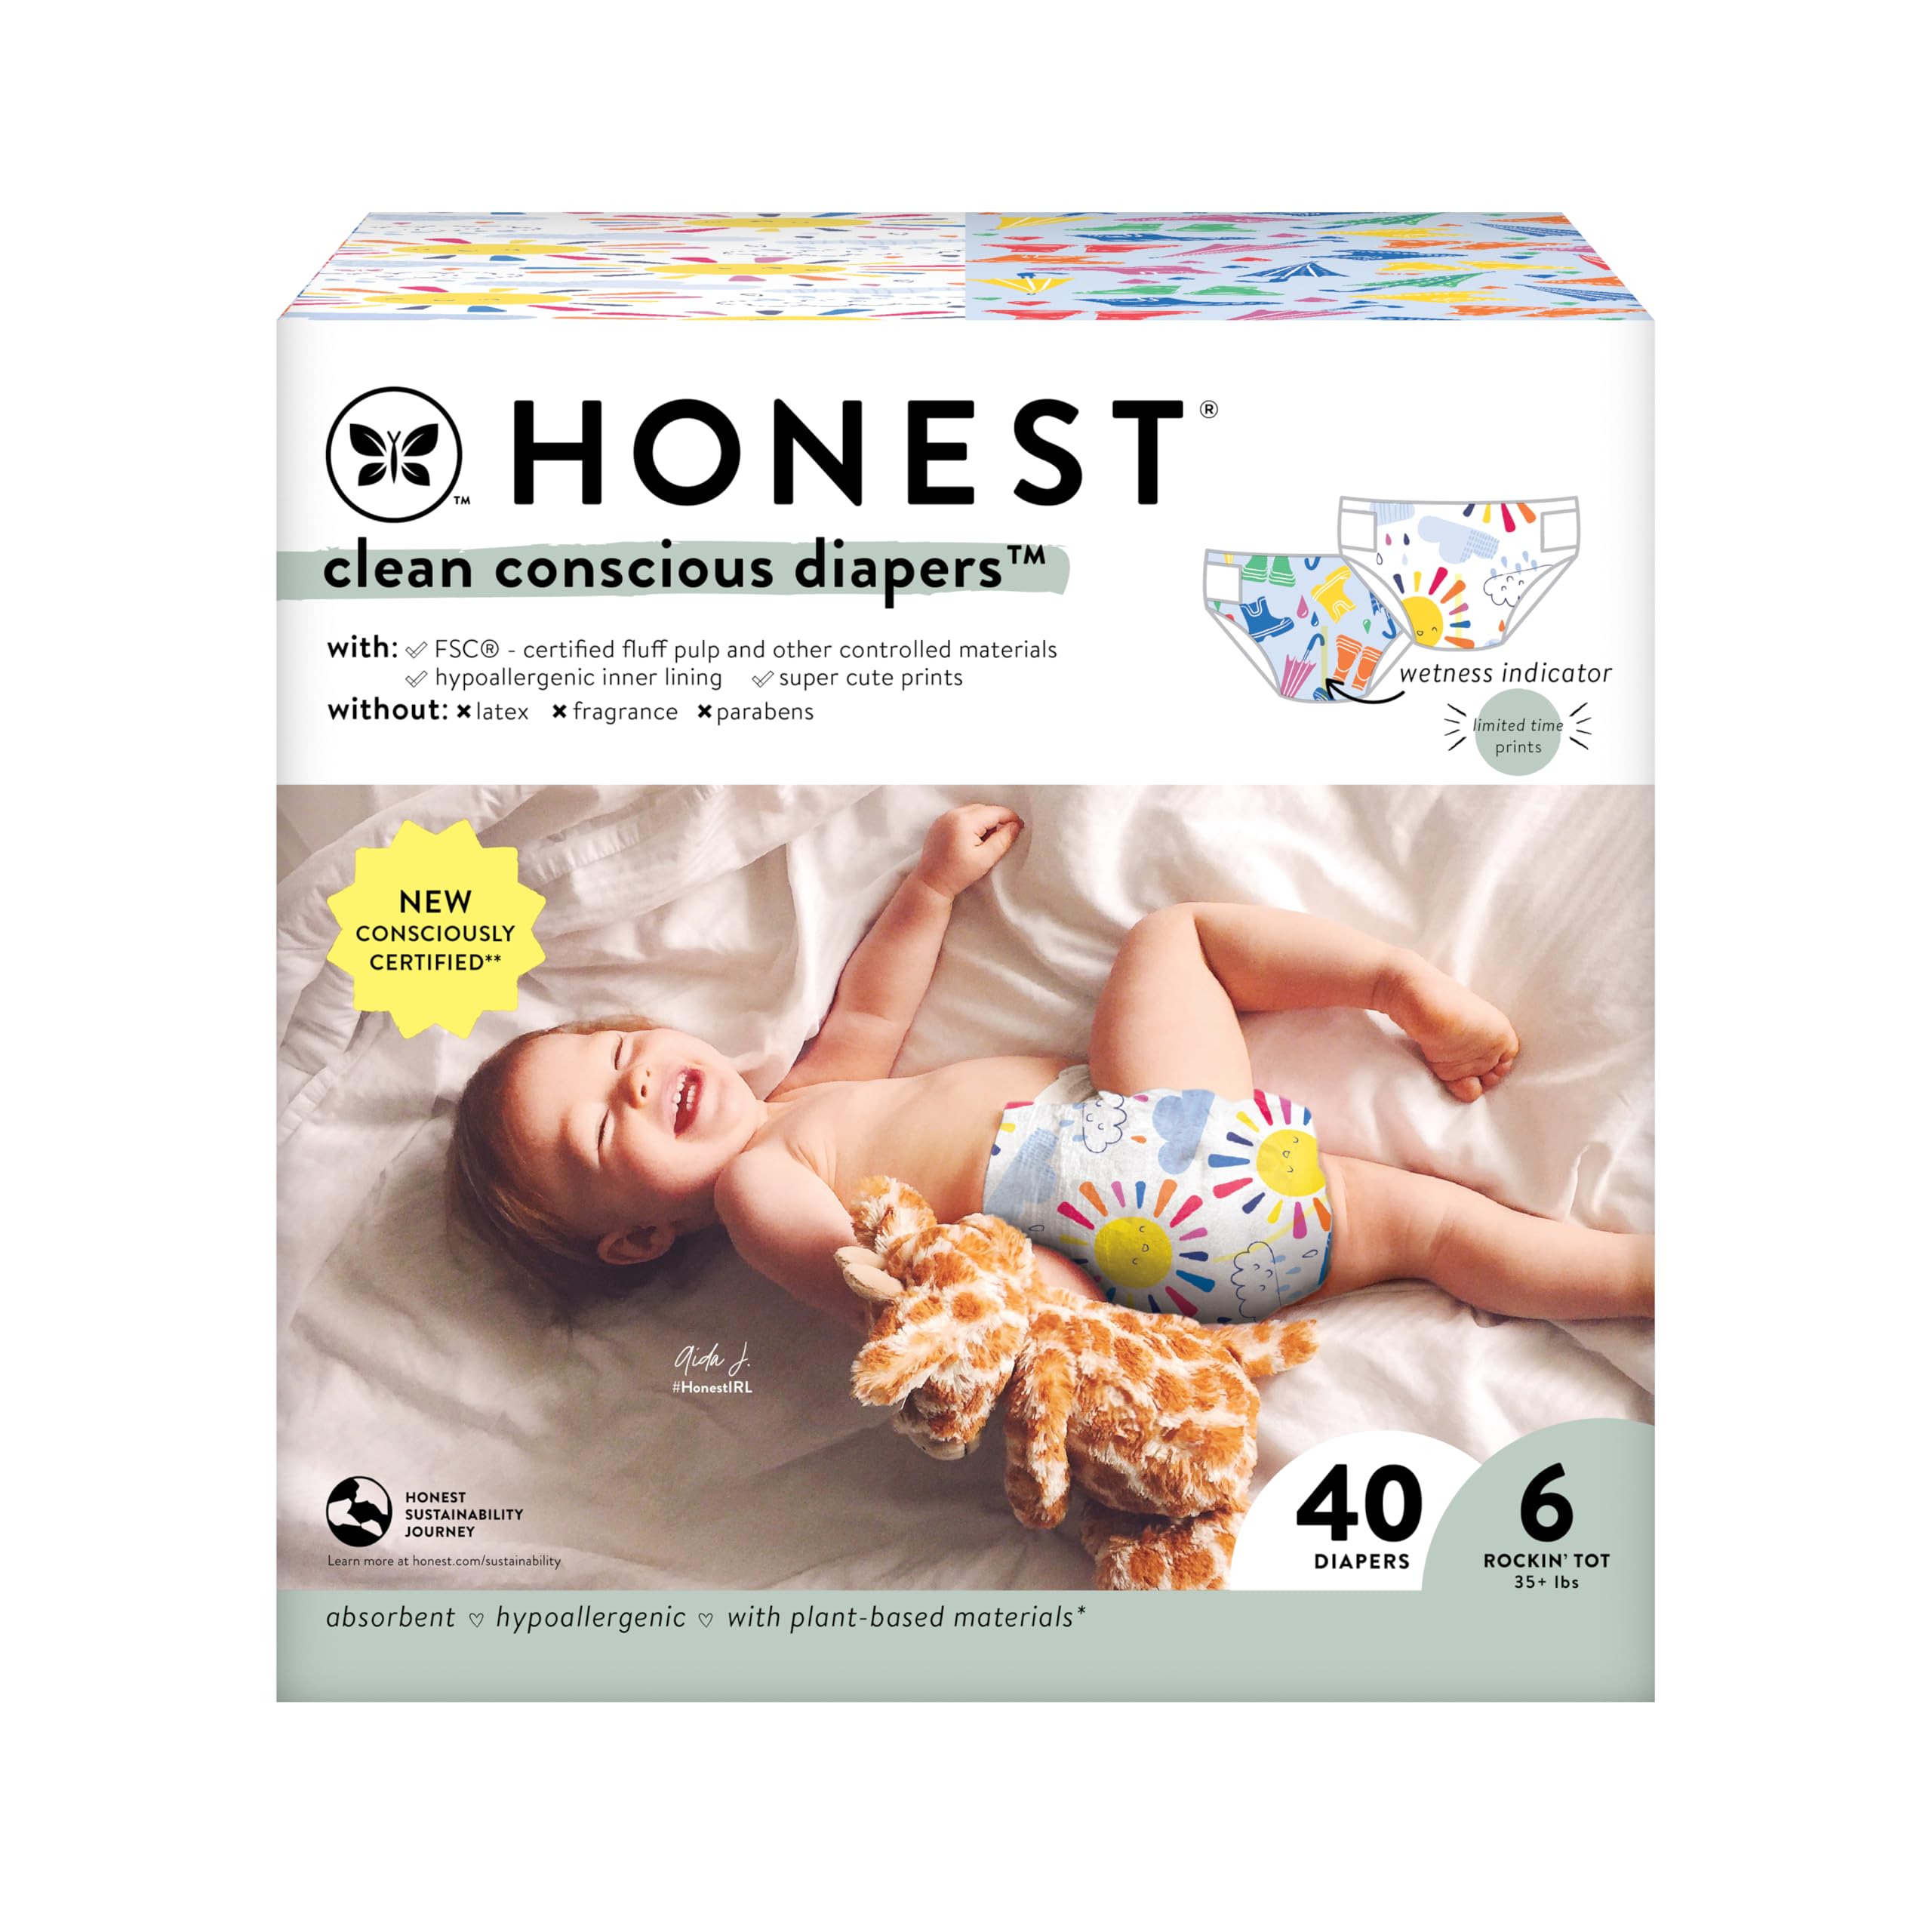 The Honest Company Clean Conscious Diapers | Plant-Based, Sustainable | Limited Edition Prints | Club Box, Size 6 (35+ lbs), 40 Count